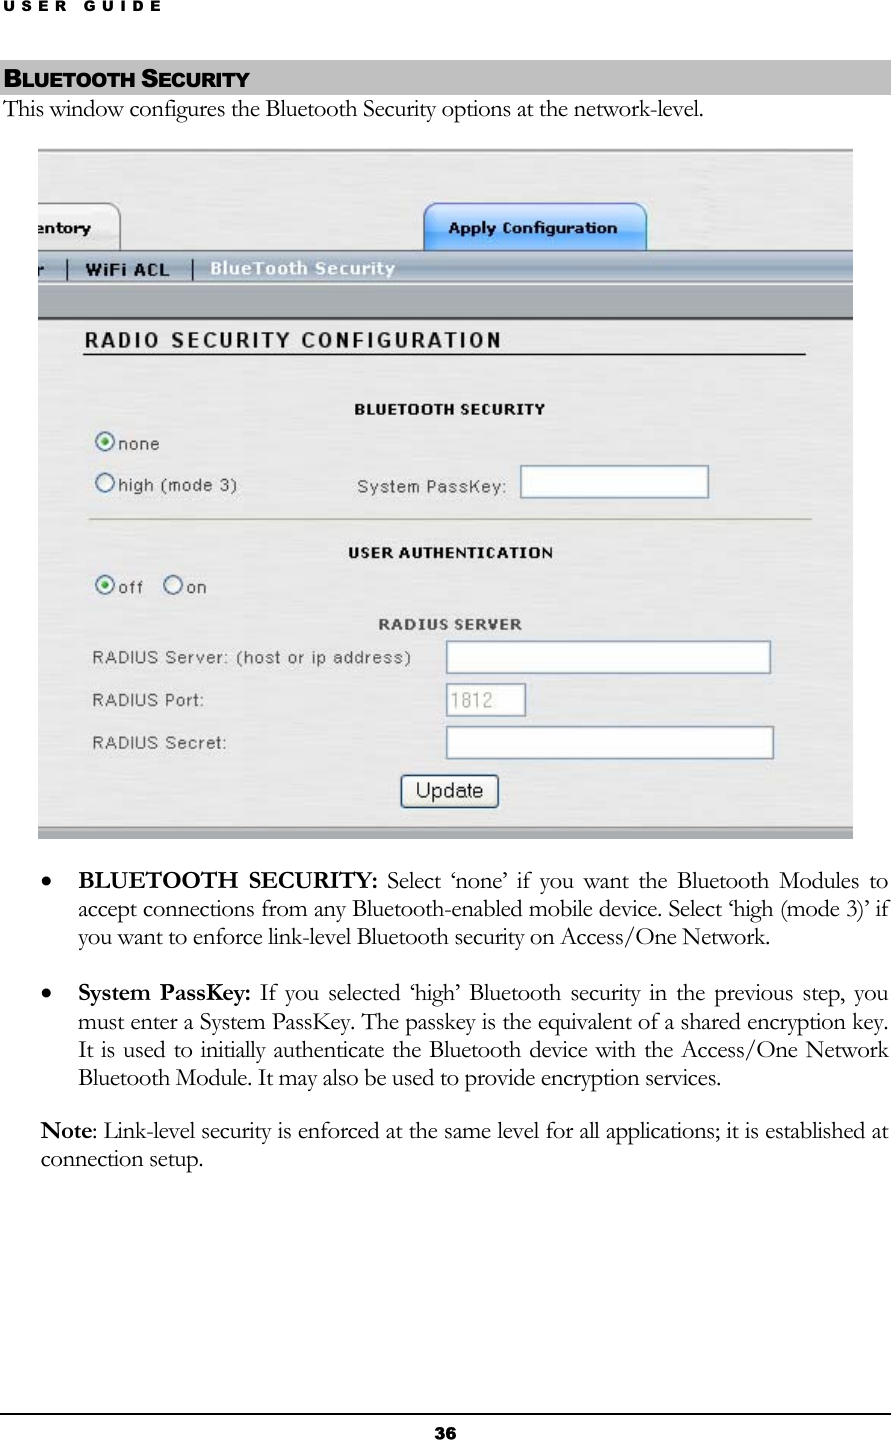 USER GUIDE BLUETOOTH SECURITY This window configures the Bluetooth Security options at the network-level.  • BLUETOOTH SECURITY: Select ‘none’ if you want the Bluetooth Modules to accept connections from any Bluetooth-enabled mobile device. Select ‘high (mode 3)’ if you want to enforce link-level Bluetooth security on Access/One Network. • System PassKey: If you selected ‘high’ Bluetooth security in the previous step, you must enter a System PassKey. The passkey is the equivalent of a shared encryption key. It is used to initially authenticate the Bluetooth device with the Access/One Network Bluetooth Module. It may also be used to provide encryption services. Note: Link-level security is enforced at the same level for all applications; it is established at connection setup.    36 